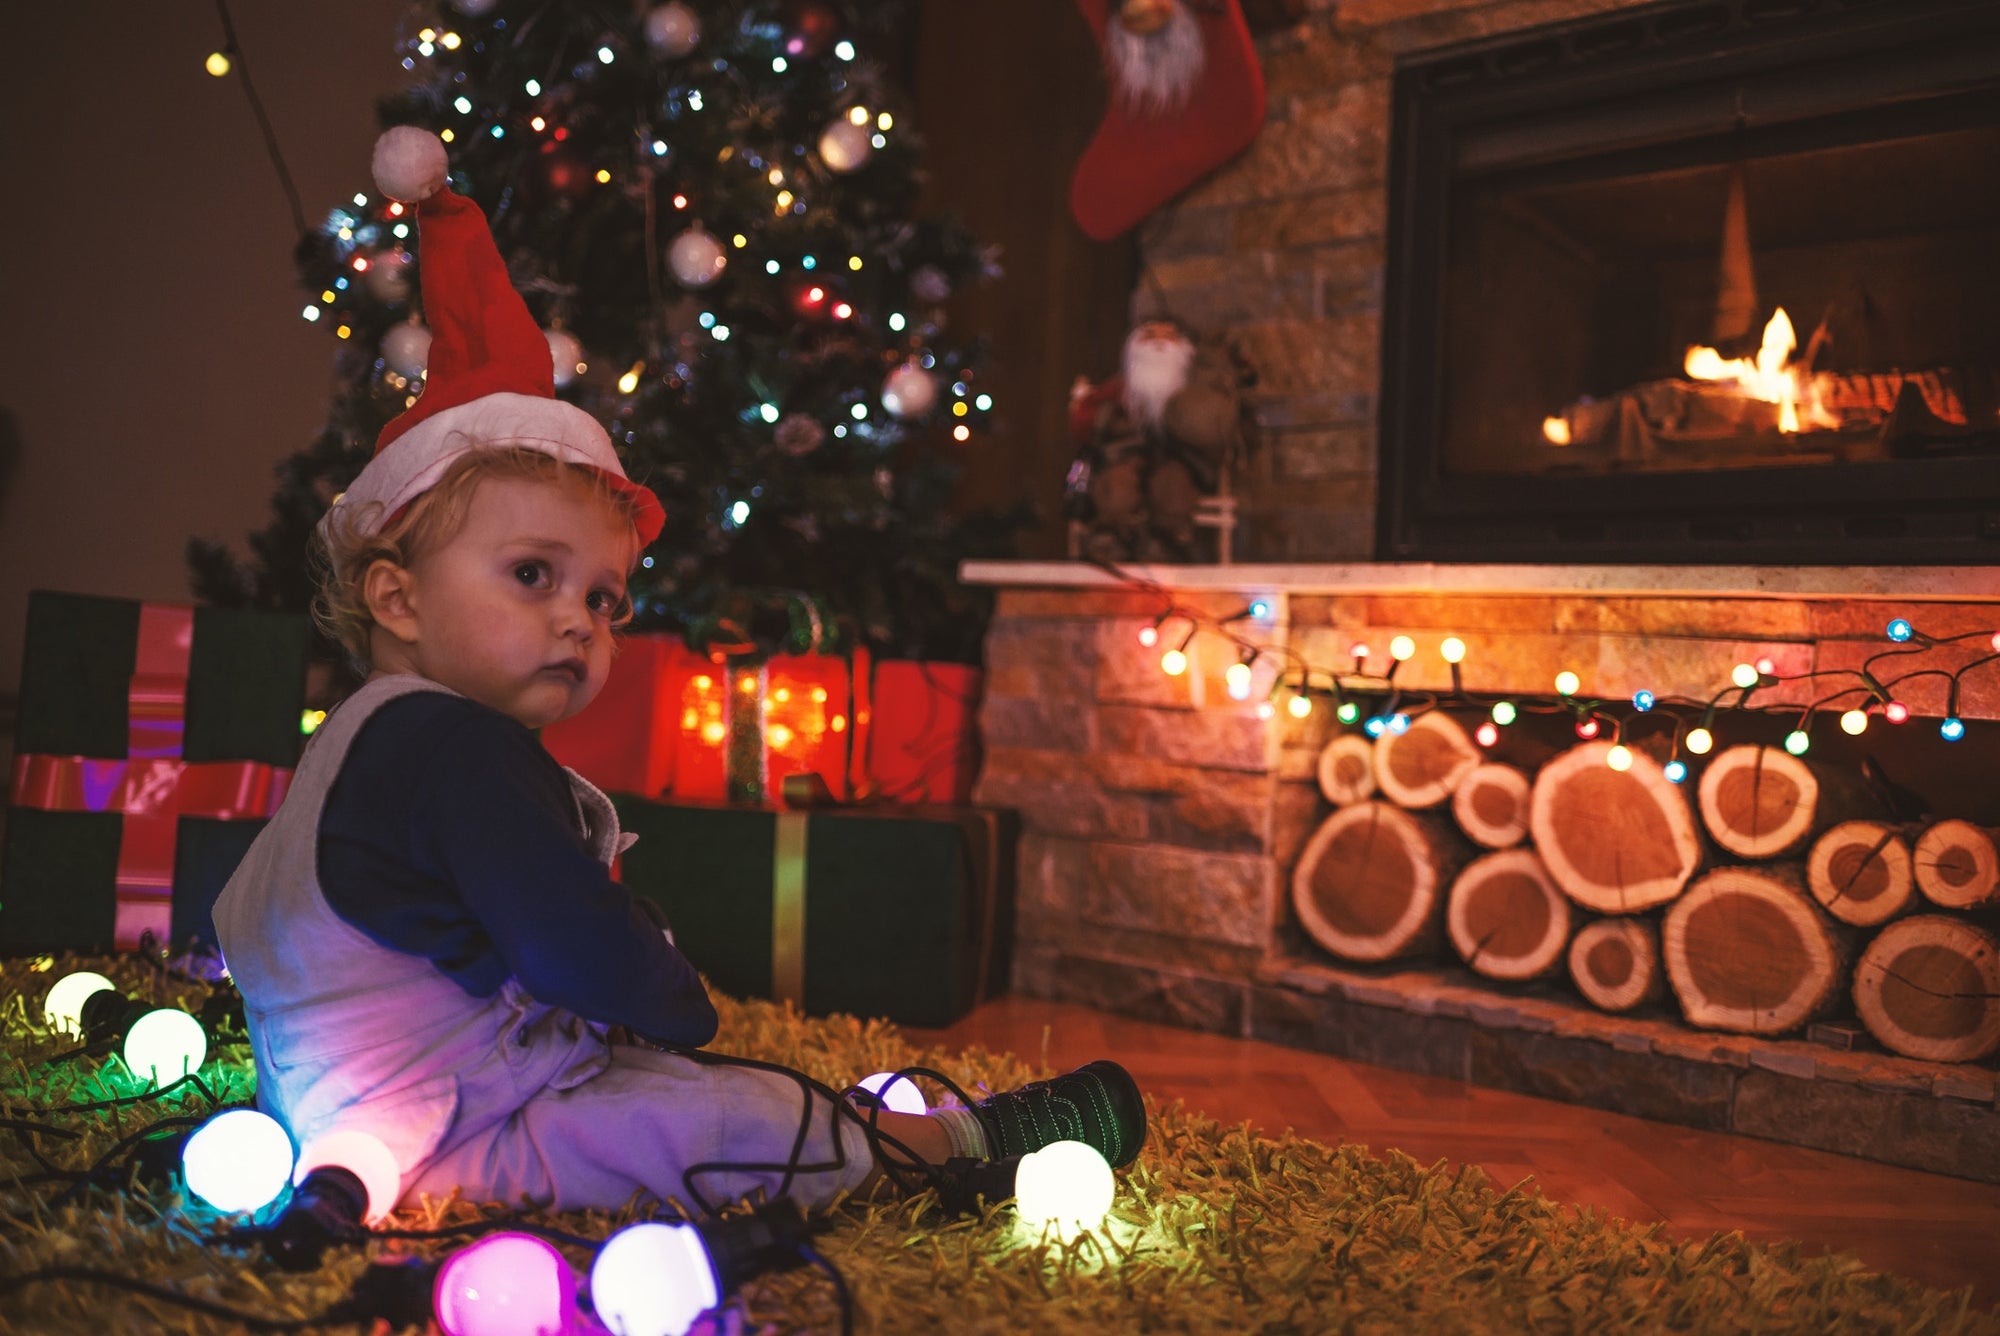 little baby boy in a Christmas cap sitting on floor by the Christmas tree